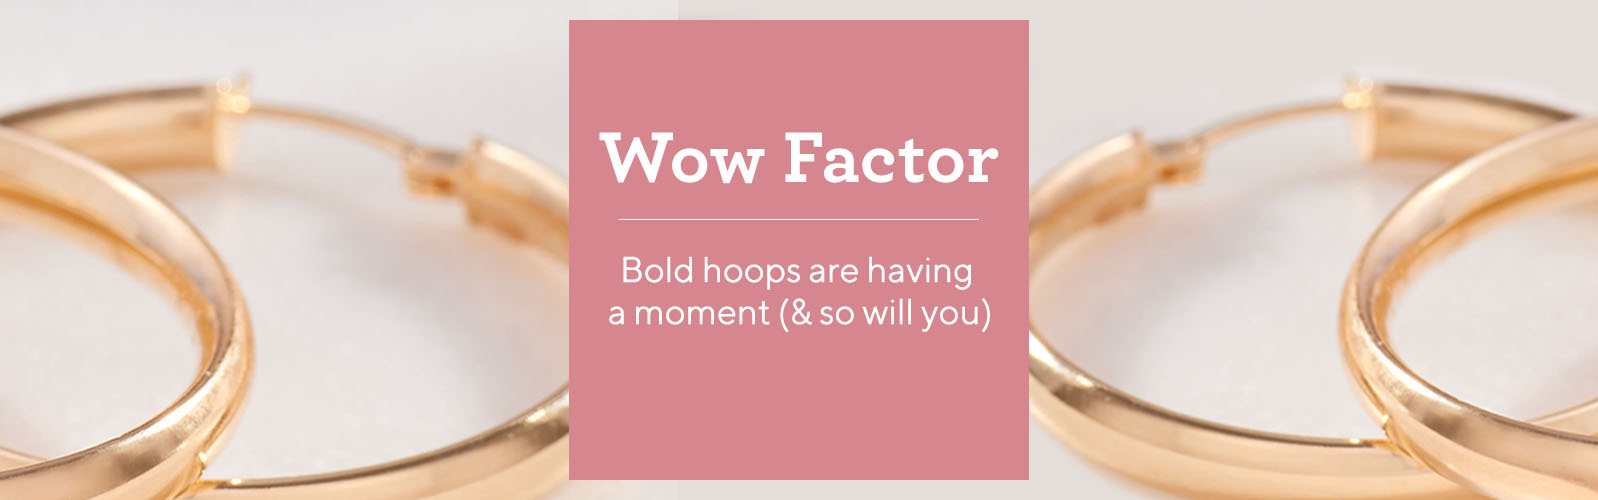 Wow Factor  Bold hoops are having a moment (& so will you)